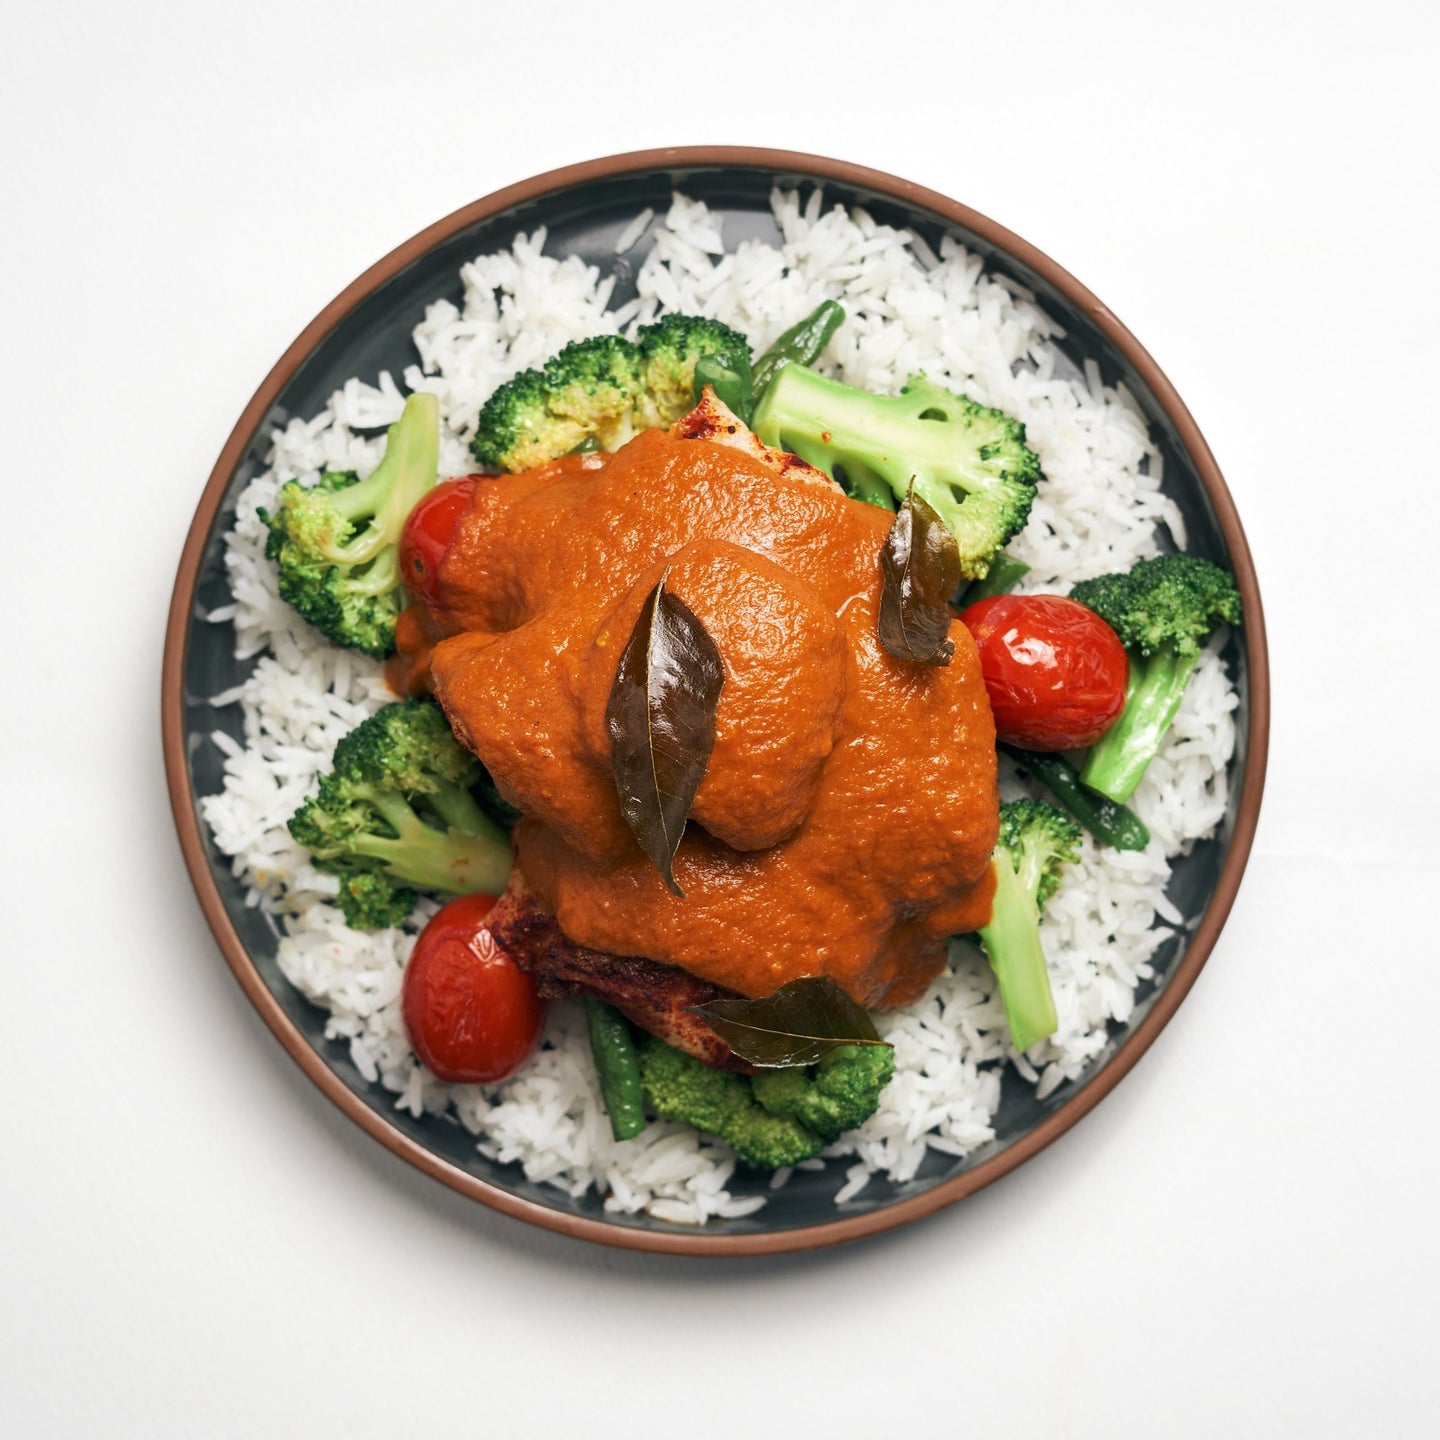 Malaysian Curry Pumpkin with Cashews, Steamed Broccoli Florets, Long Beans & Steamed Jasmine Rice